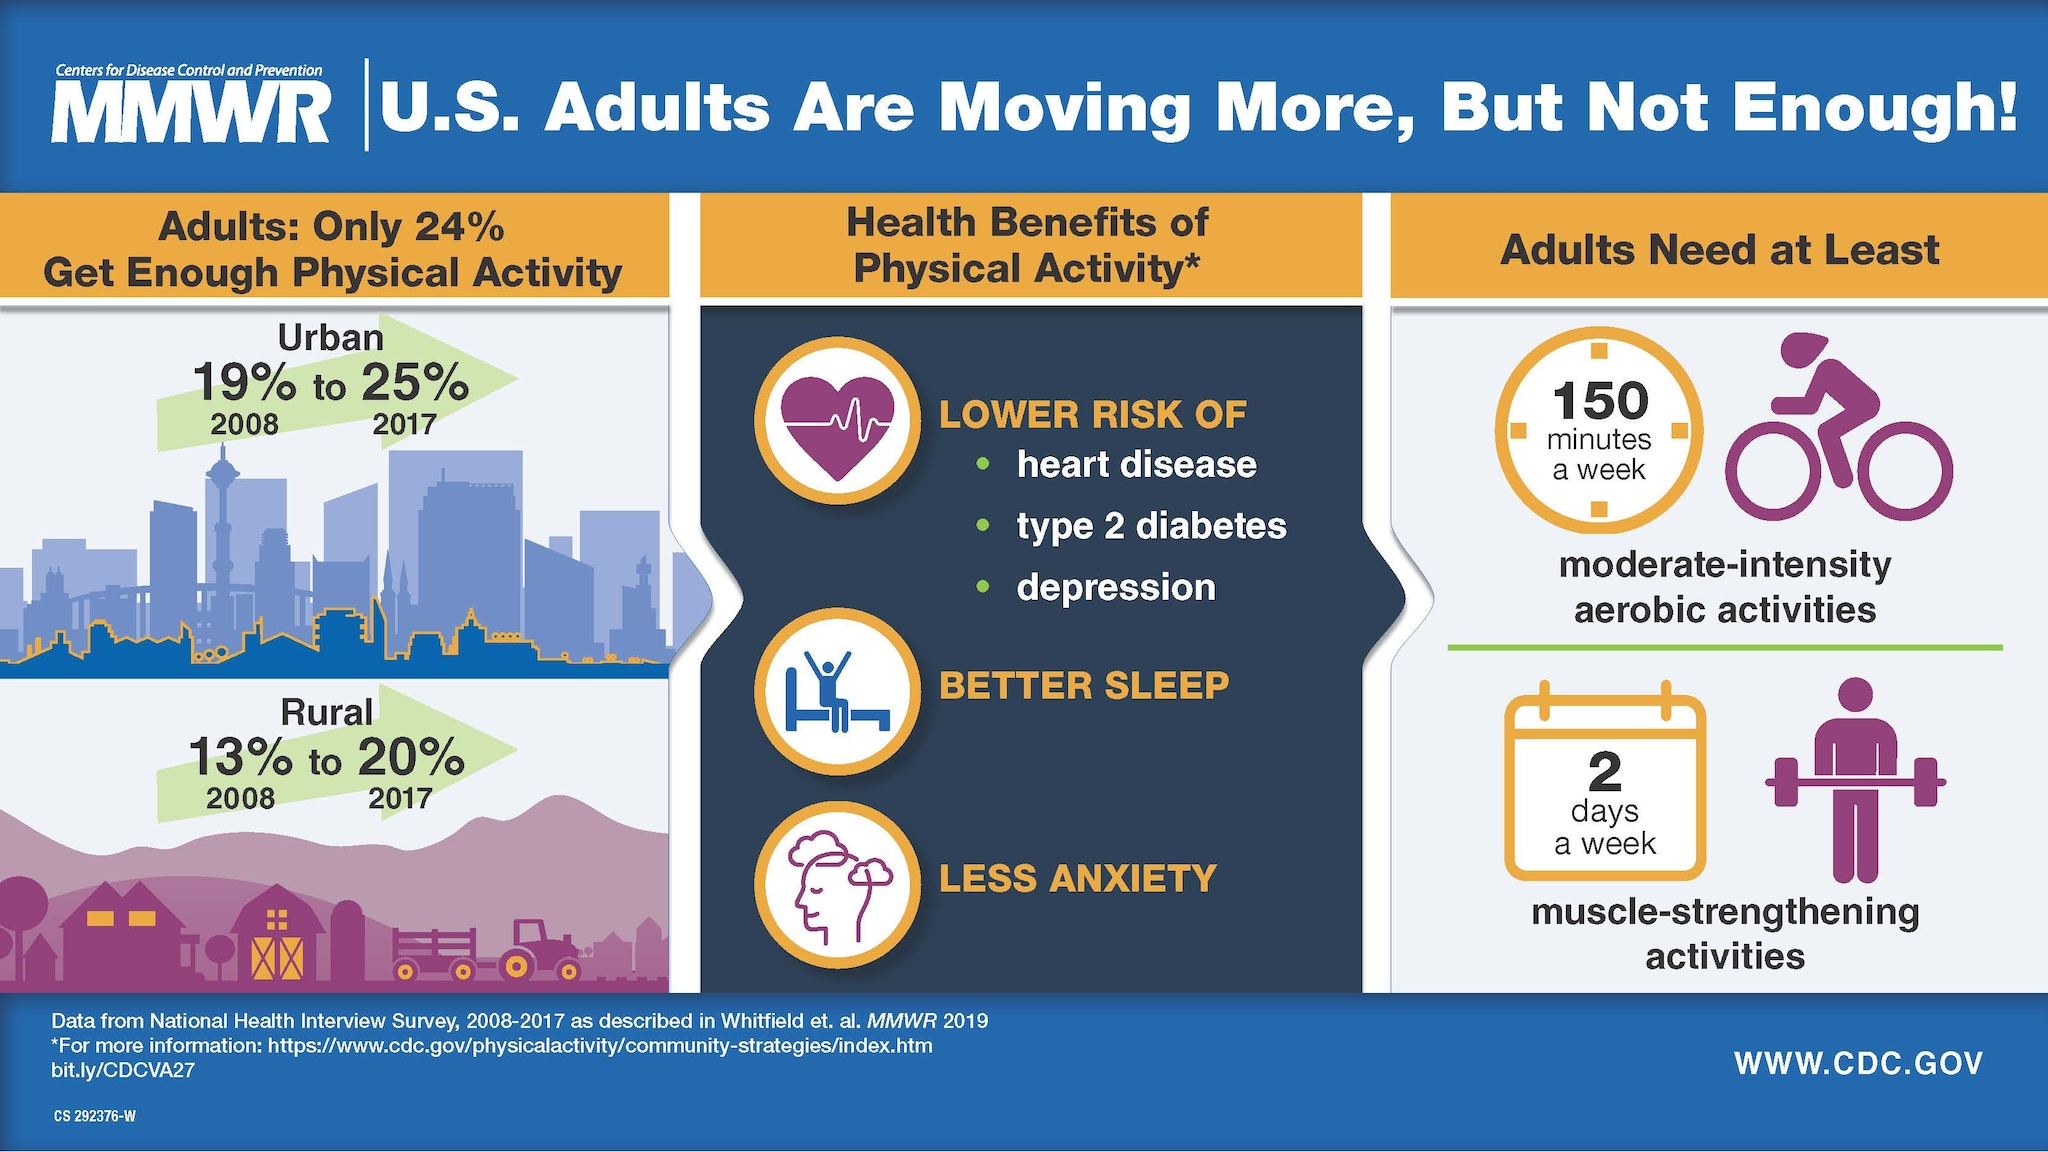 The figure is a Visual Abstract on adult physical activity; it urges communities to make activity easy for all.